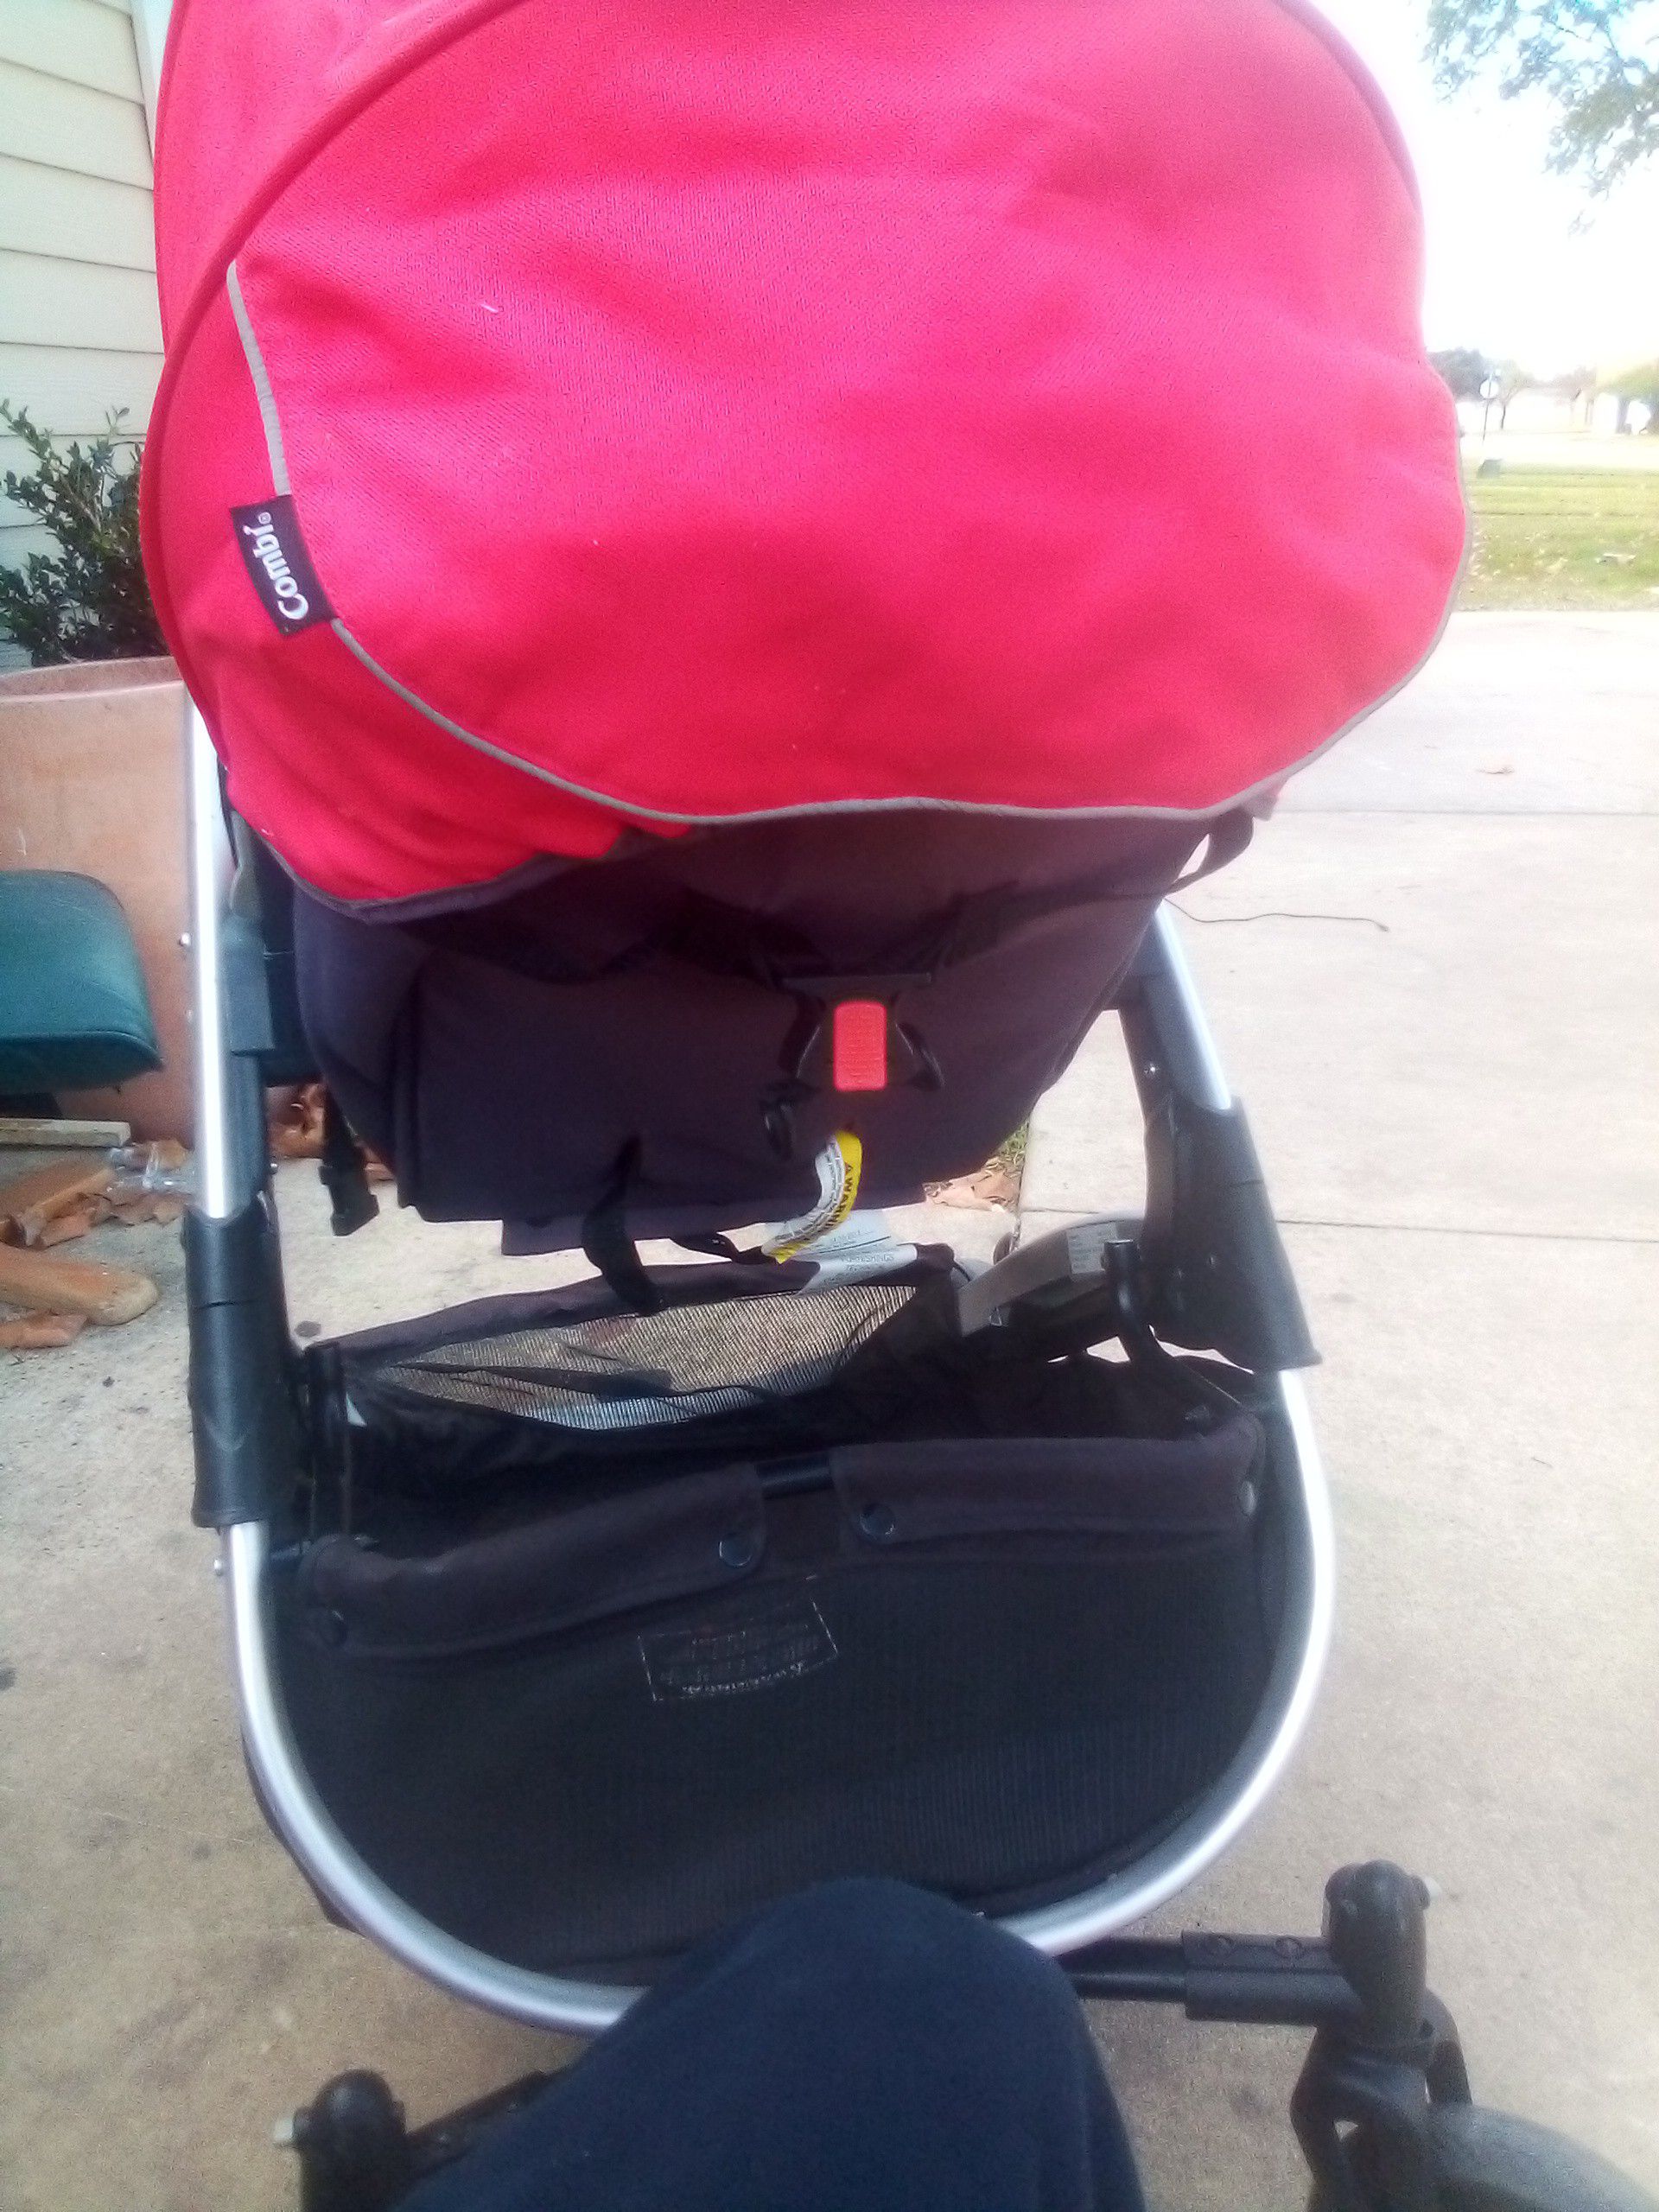 Combi baby stroller fairly new also converts into car seat the stroller has no tears or stains